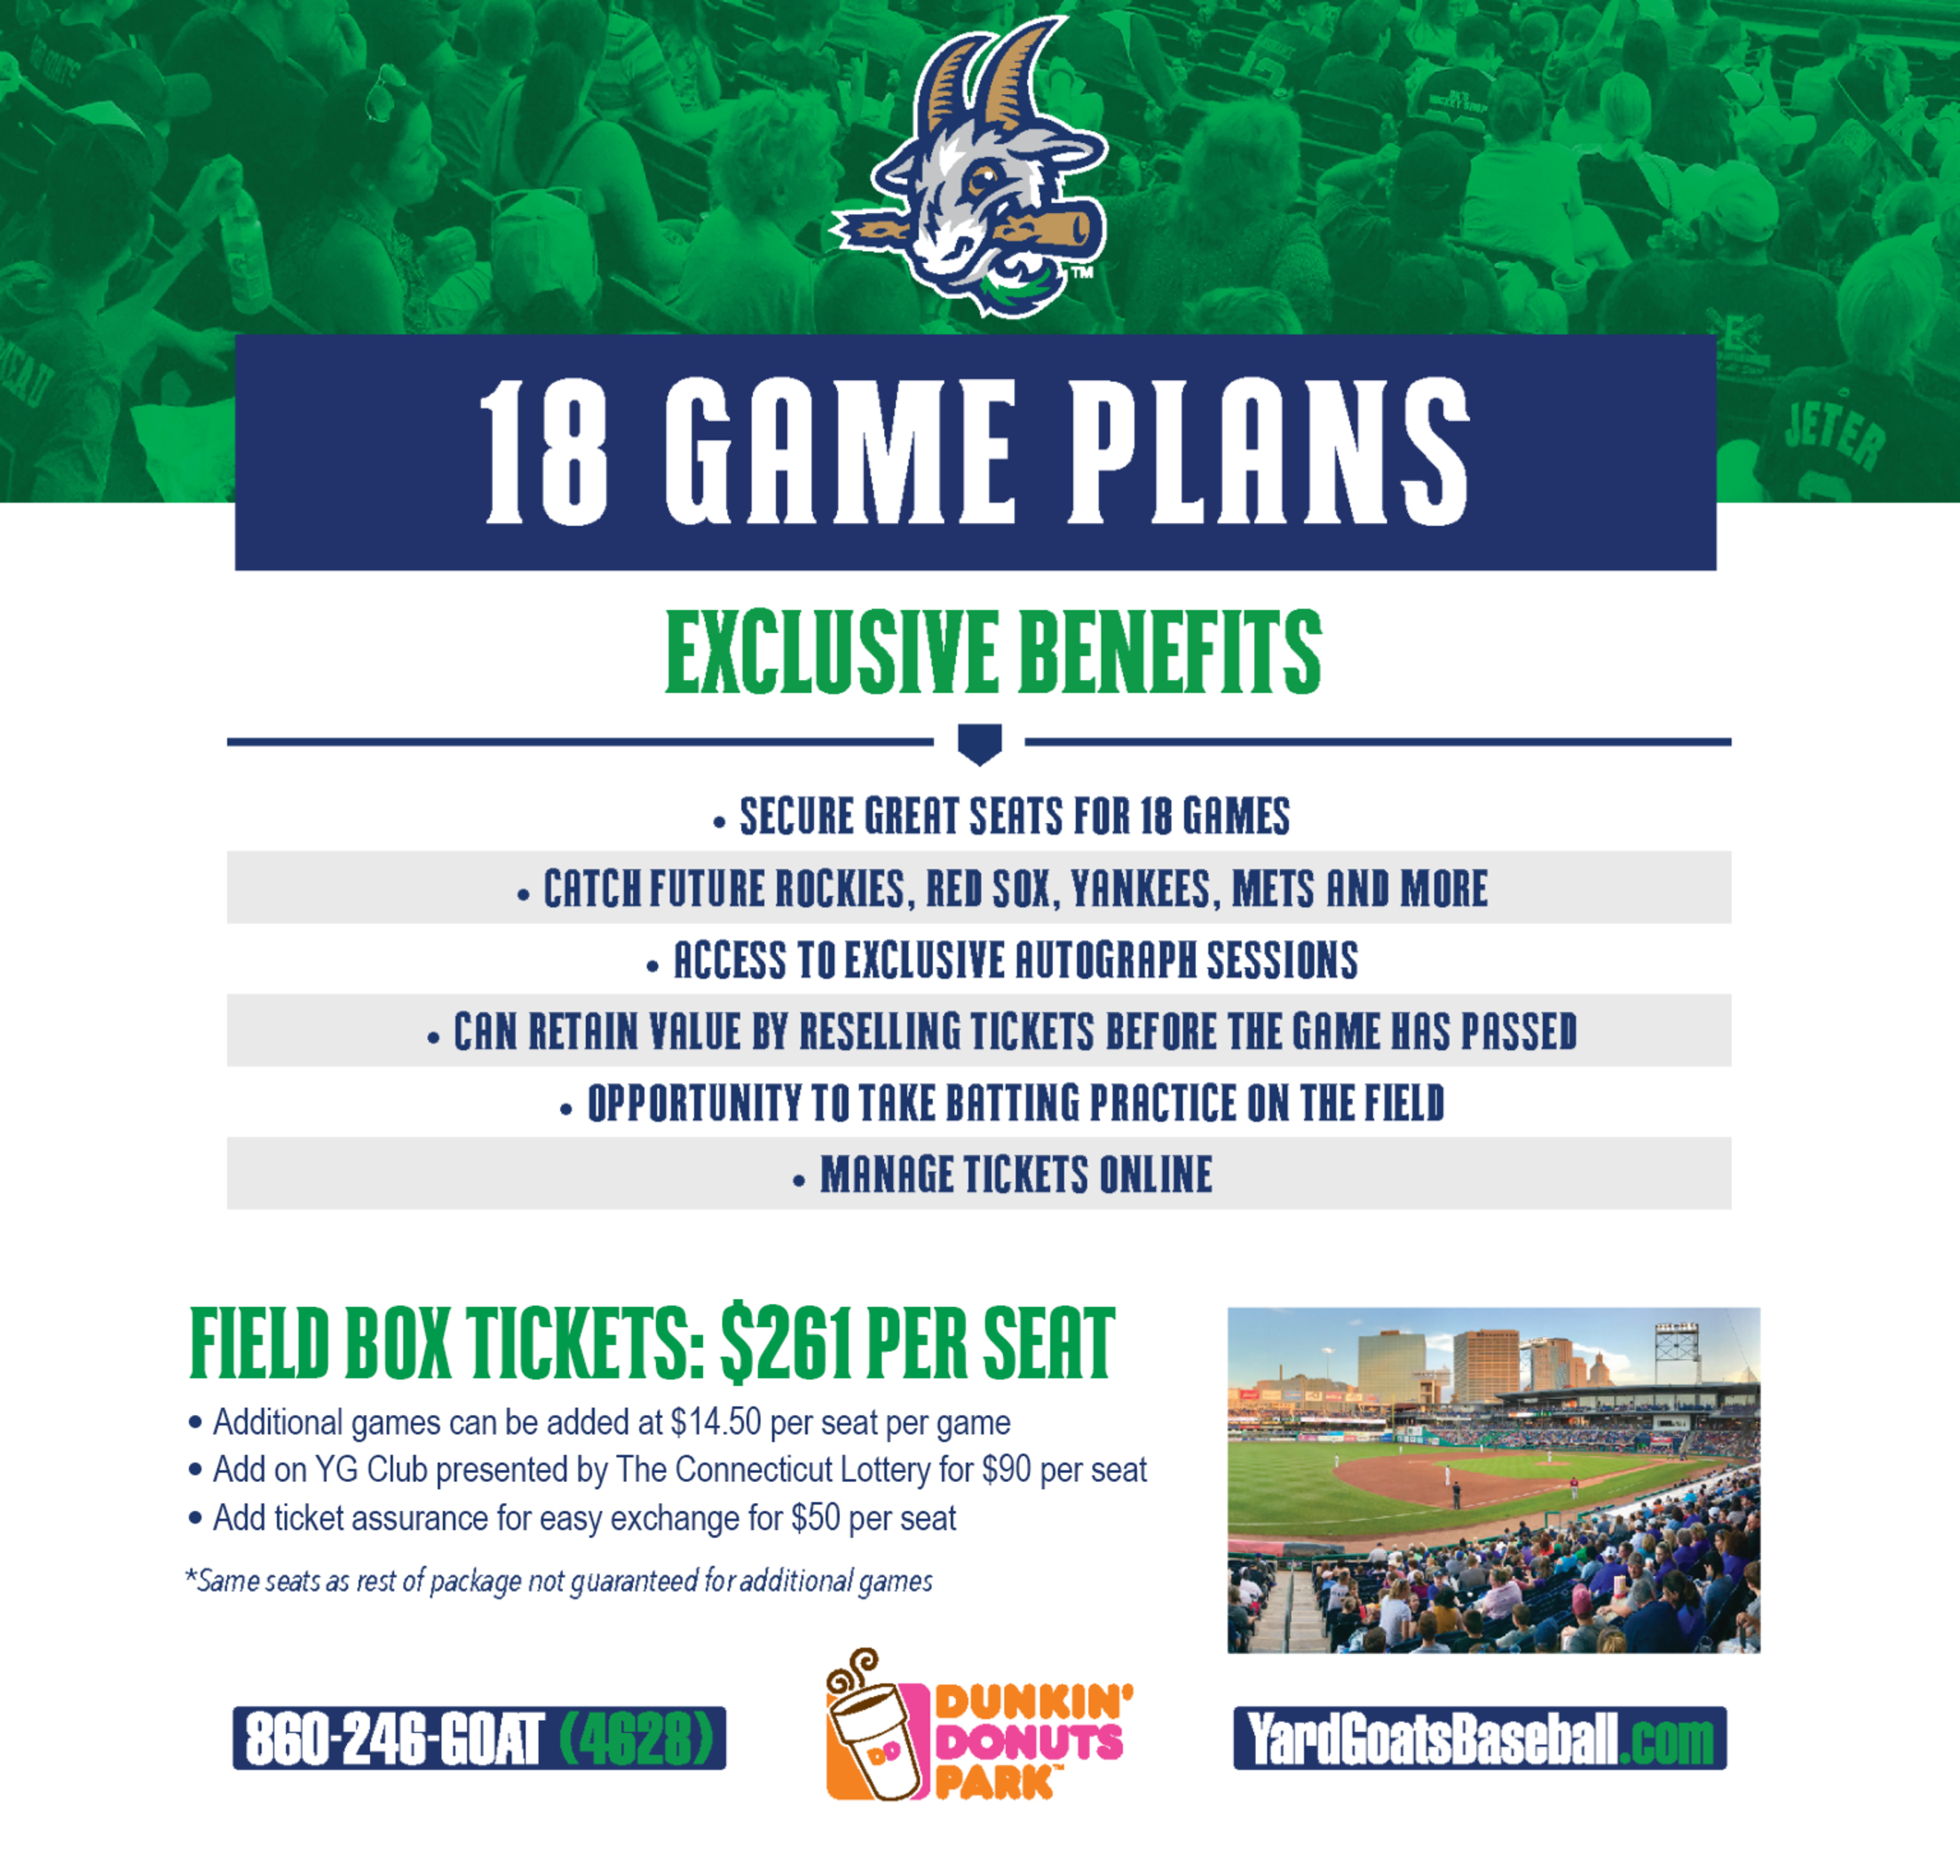 18 Game Plans Yard Goats